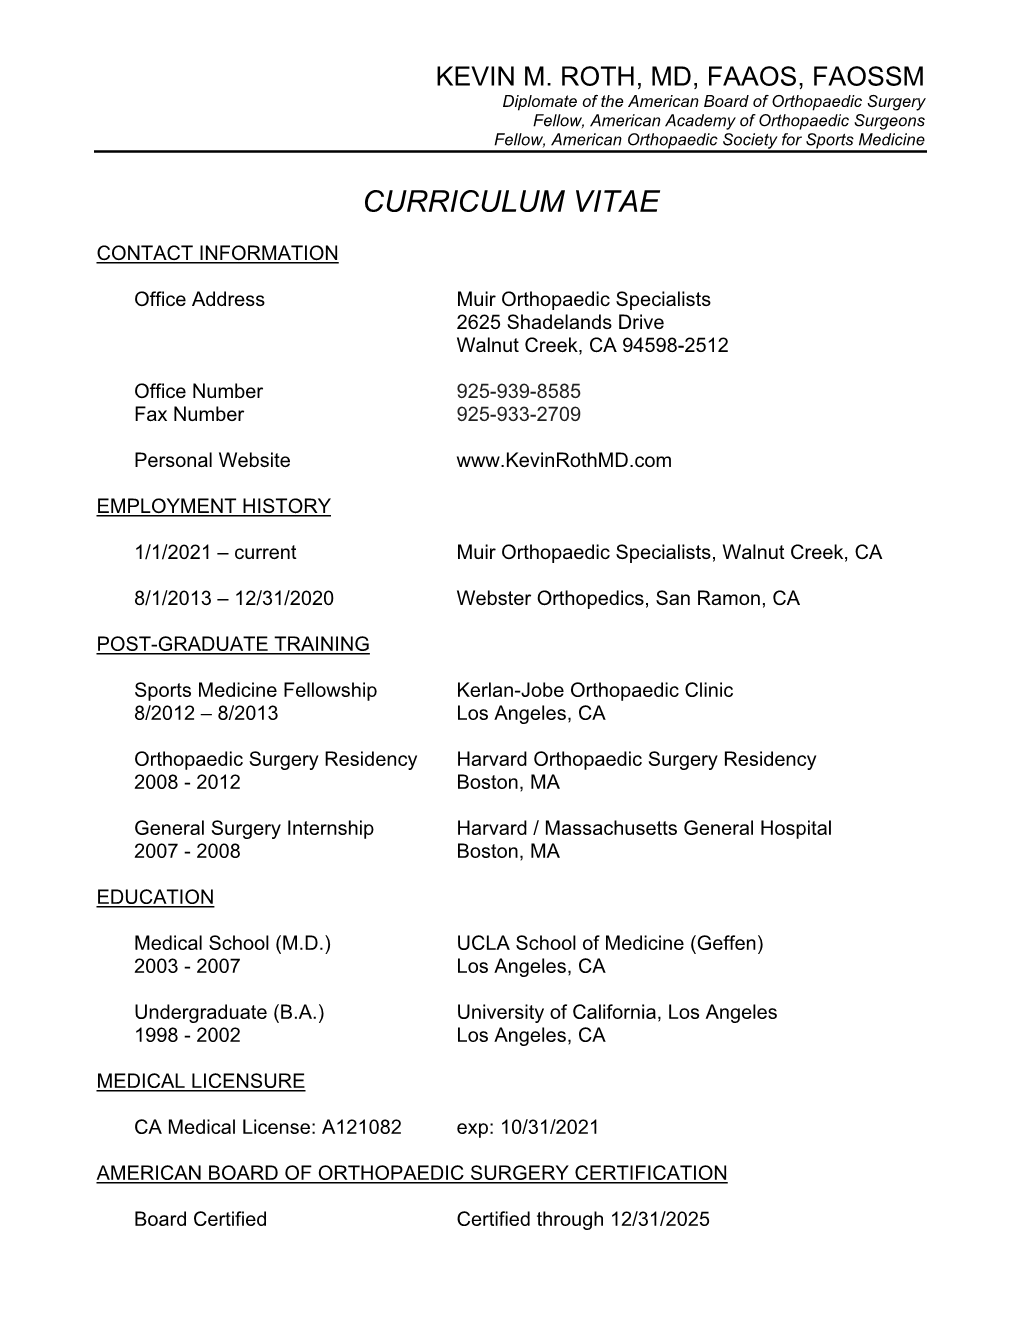 View Dr. Roth's Curriculum Vitae